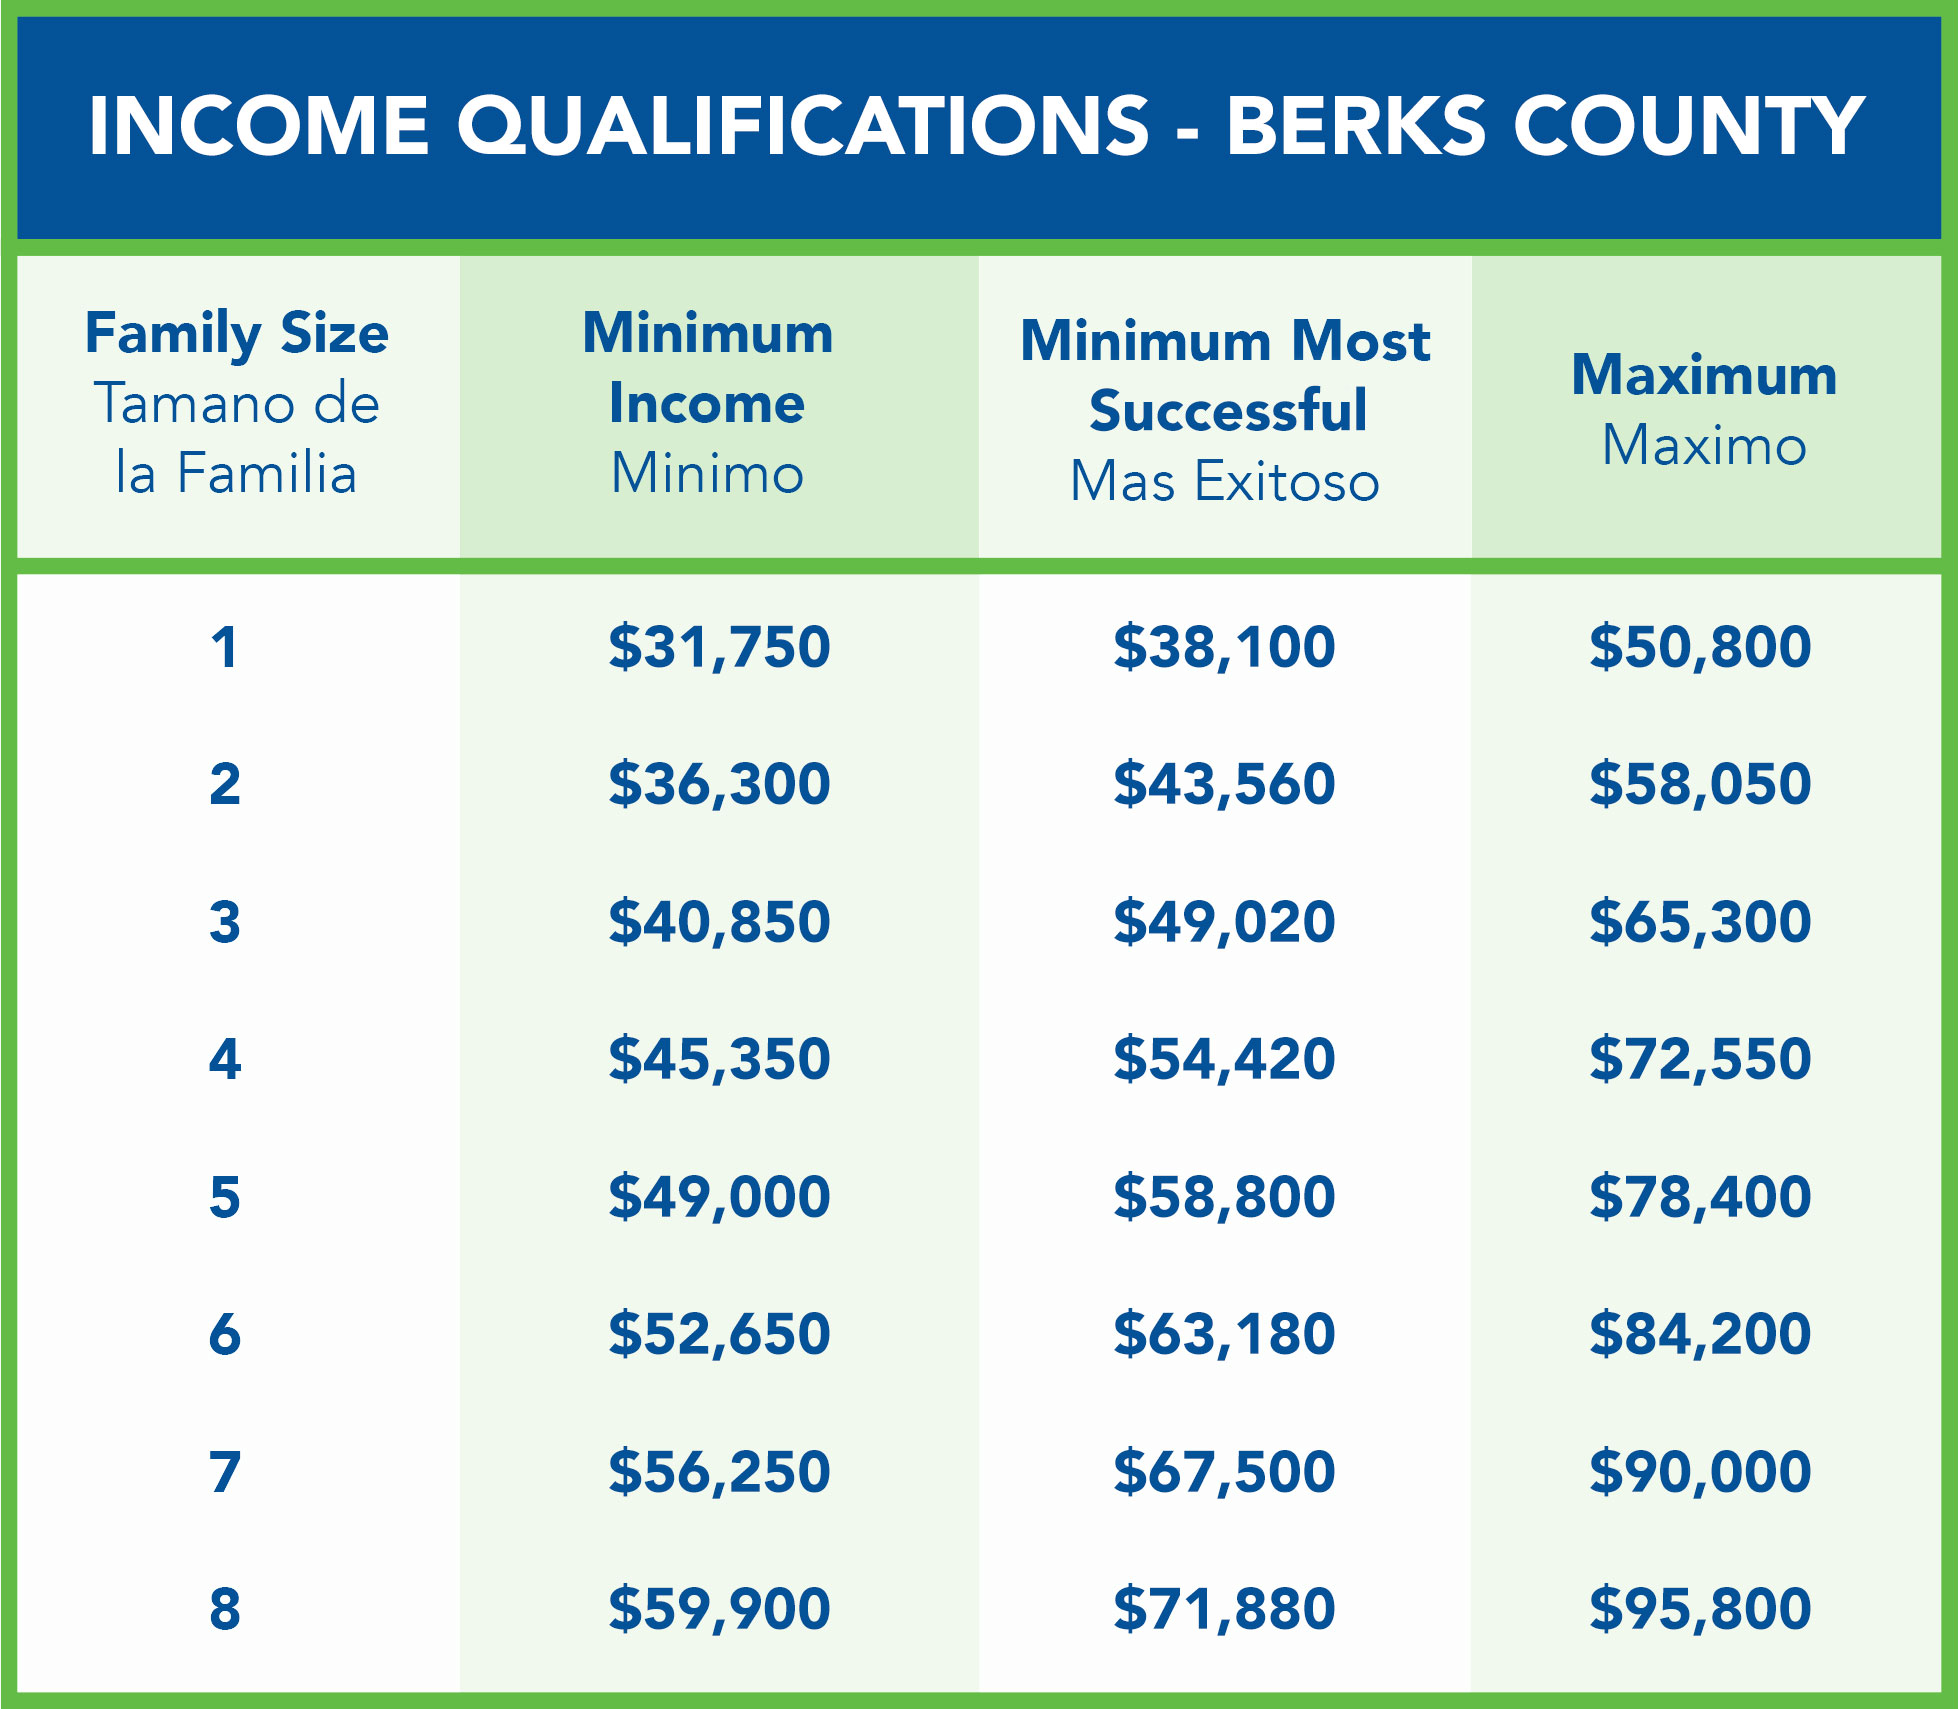 2022 Income Qualifications for Berks County